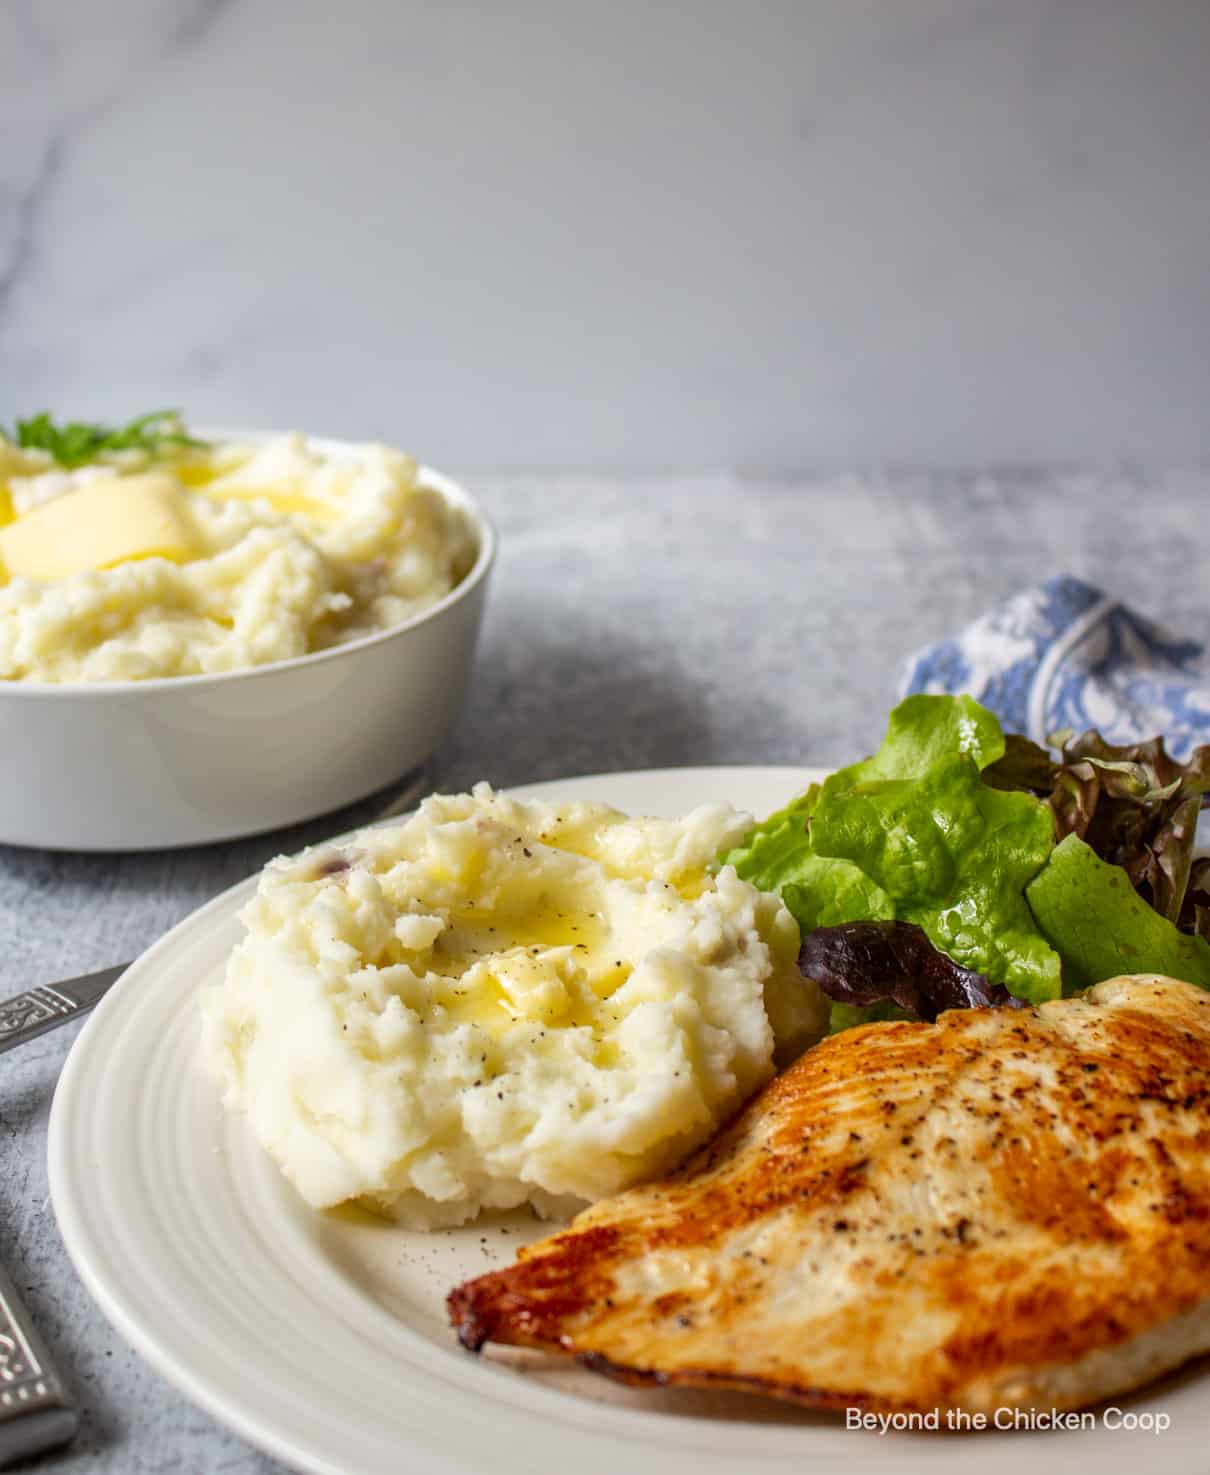 A dinner plate with chicken, mashed potatoes and a salad.